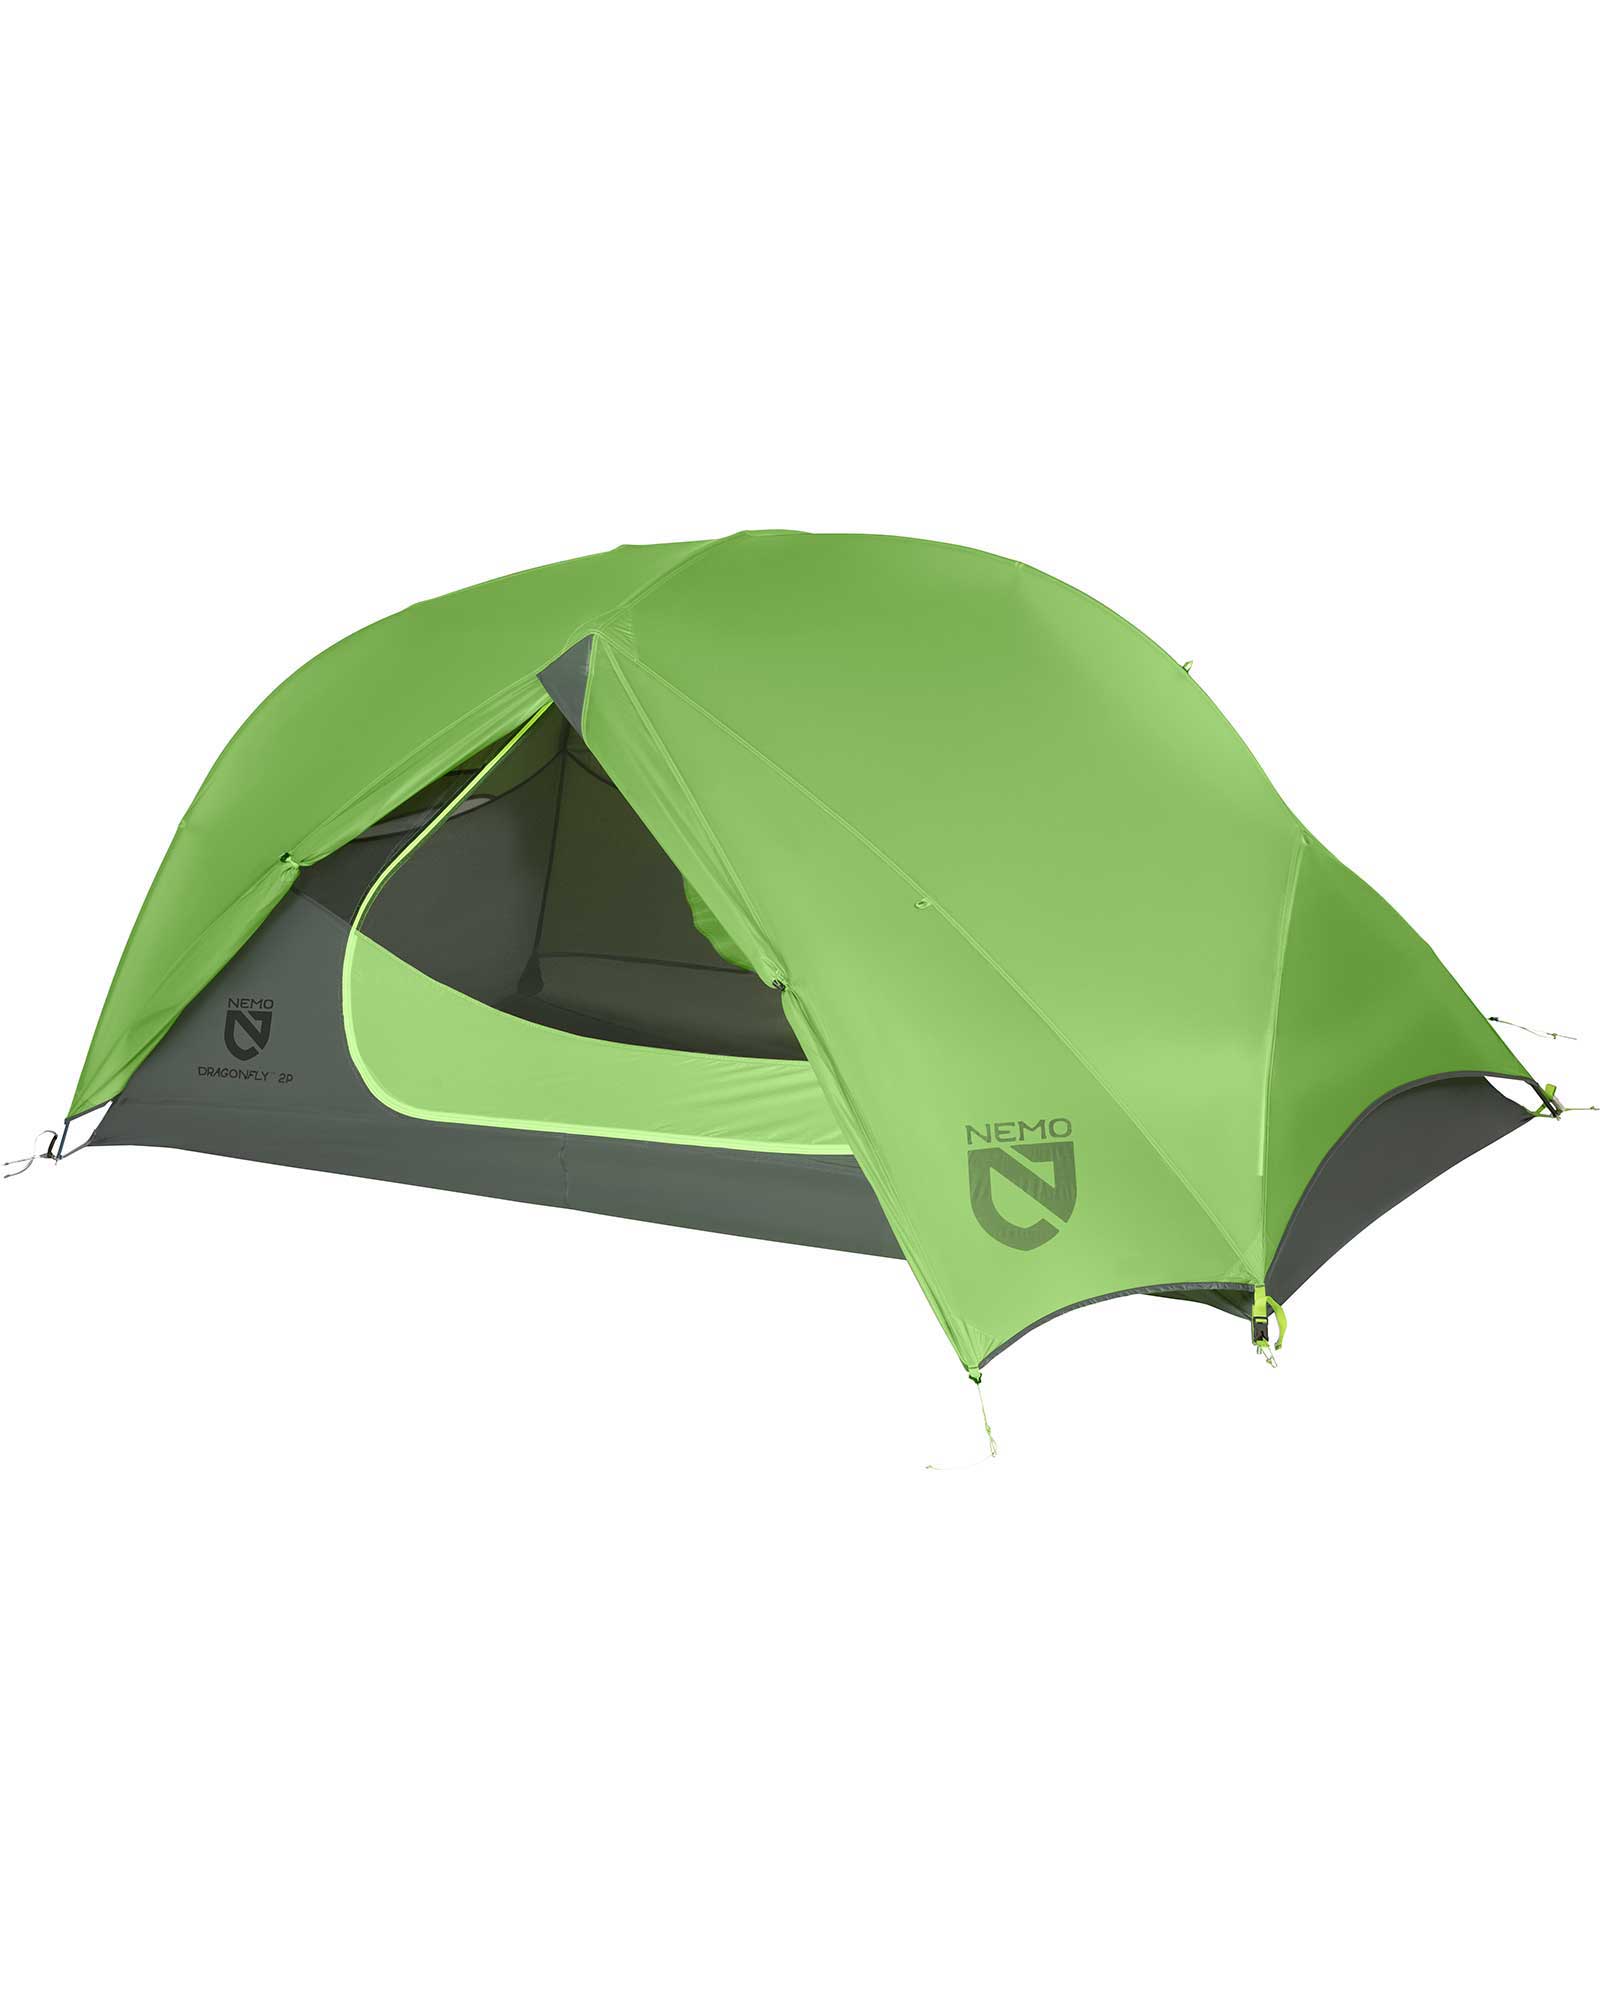 Product image of Nemo Dragonfly 1P Tent